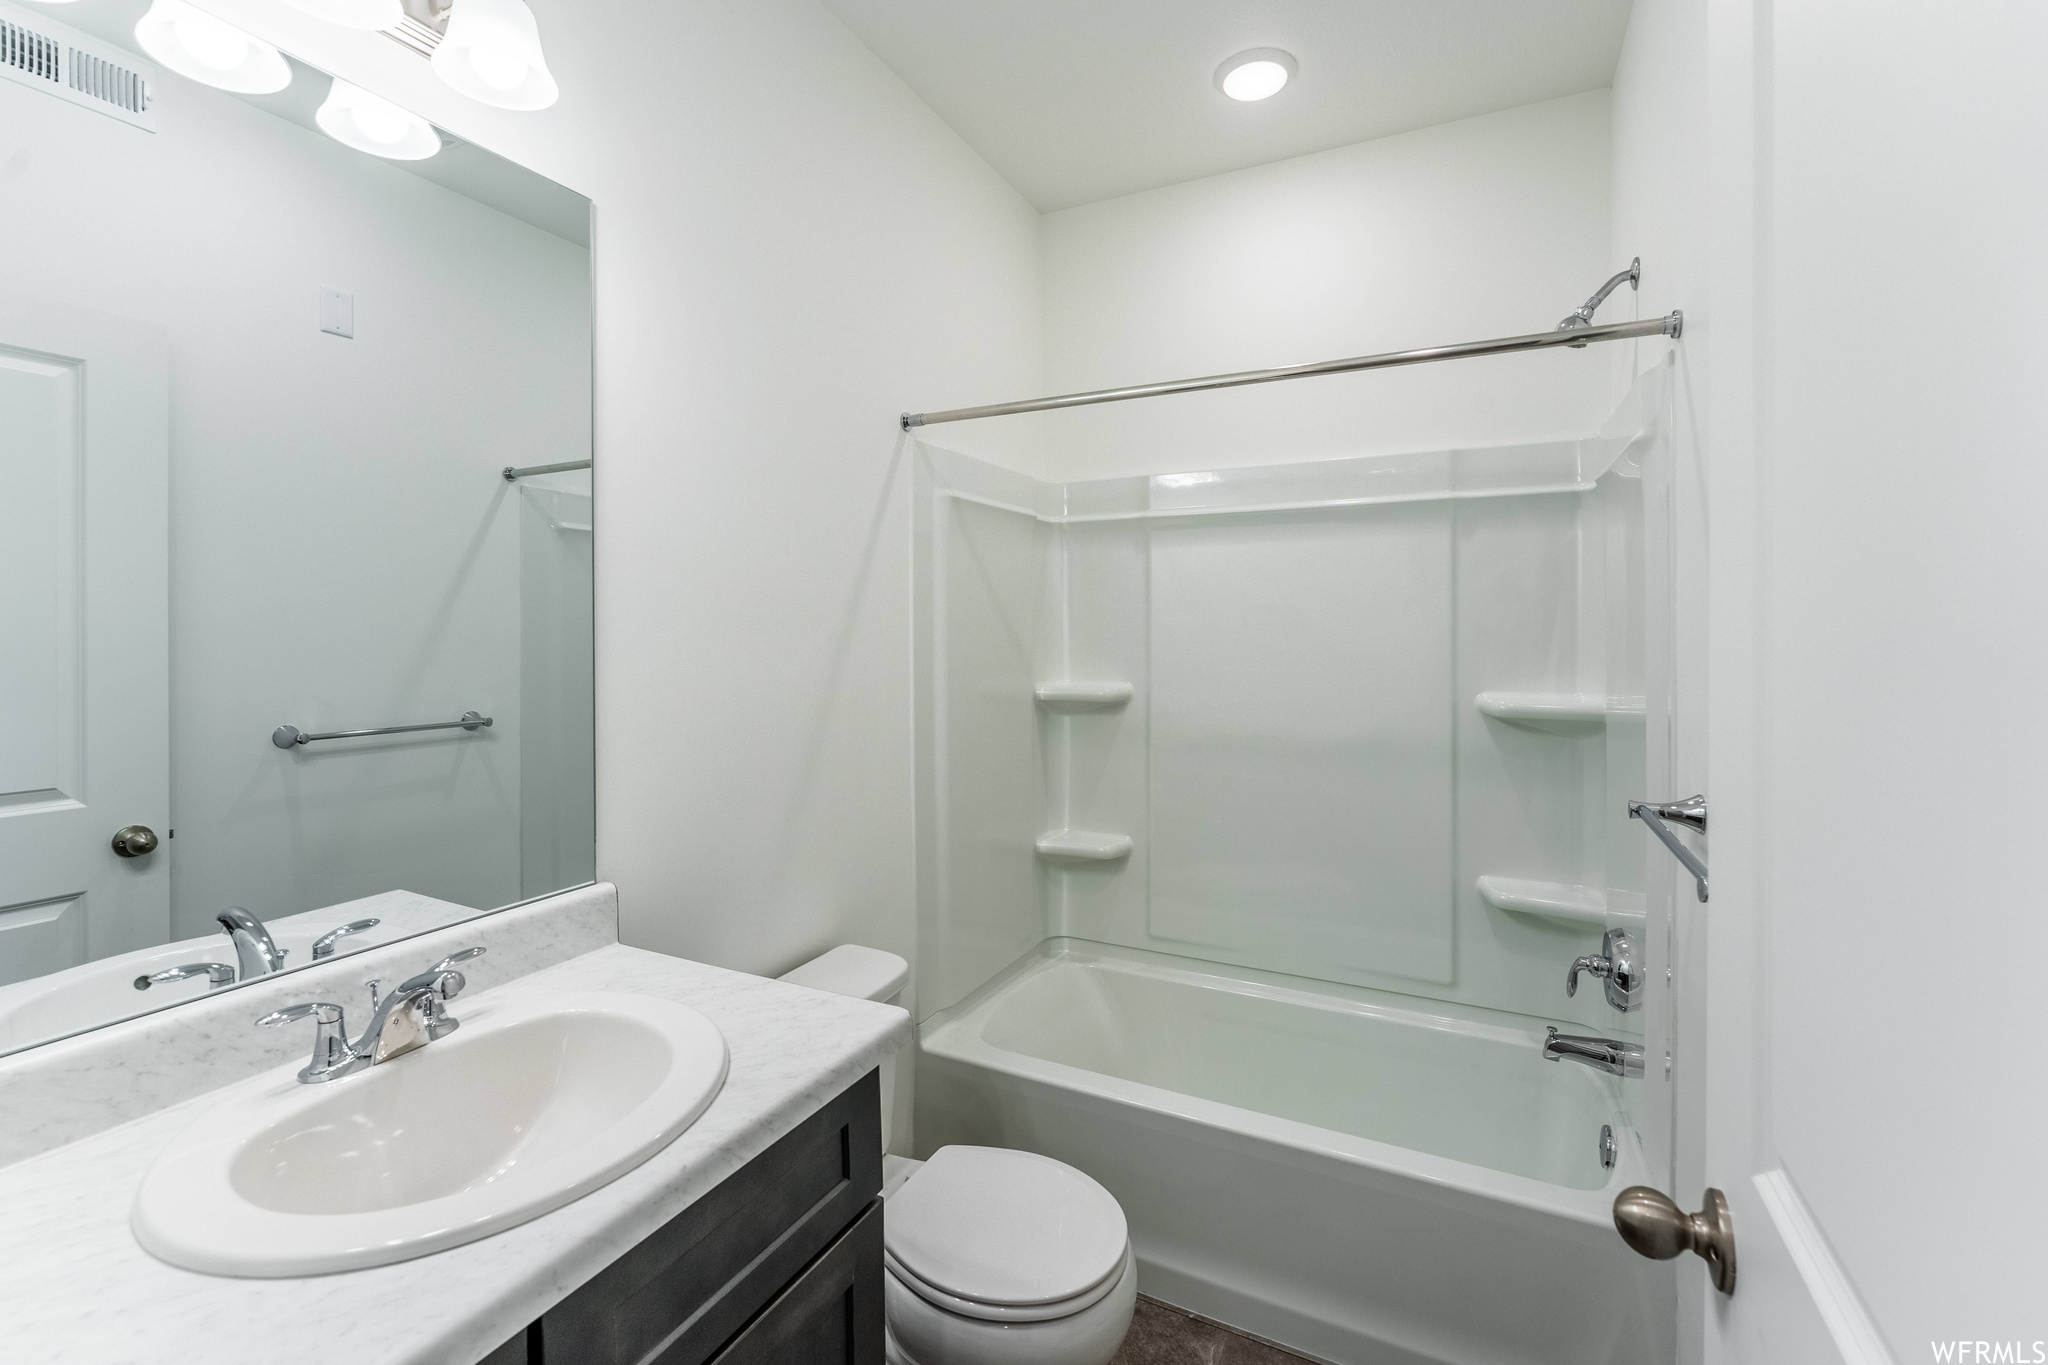 Full bathroom with toilet, vanity with extensive cabinet space, and  shower combination